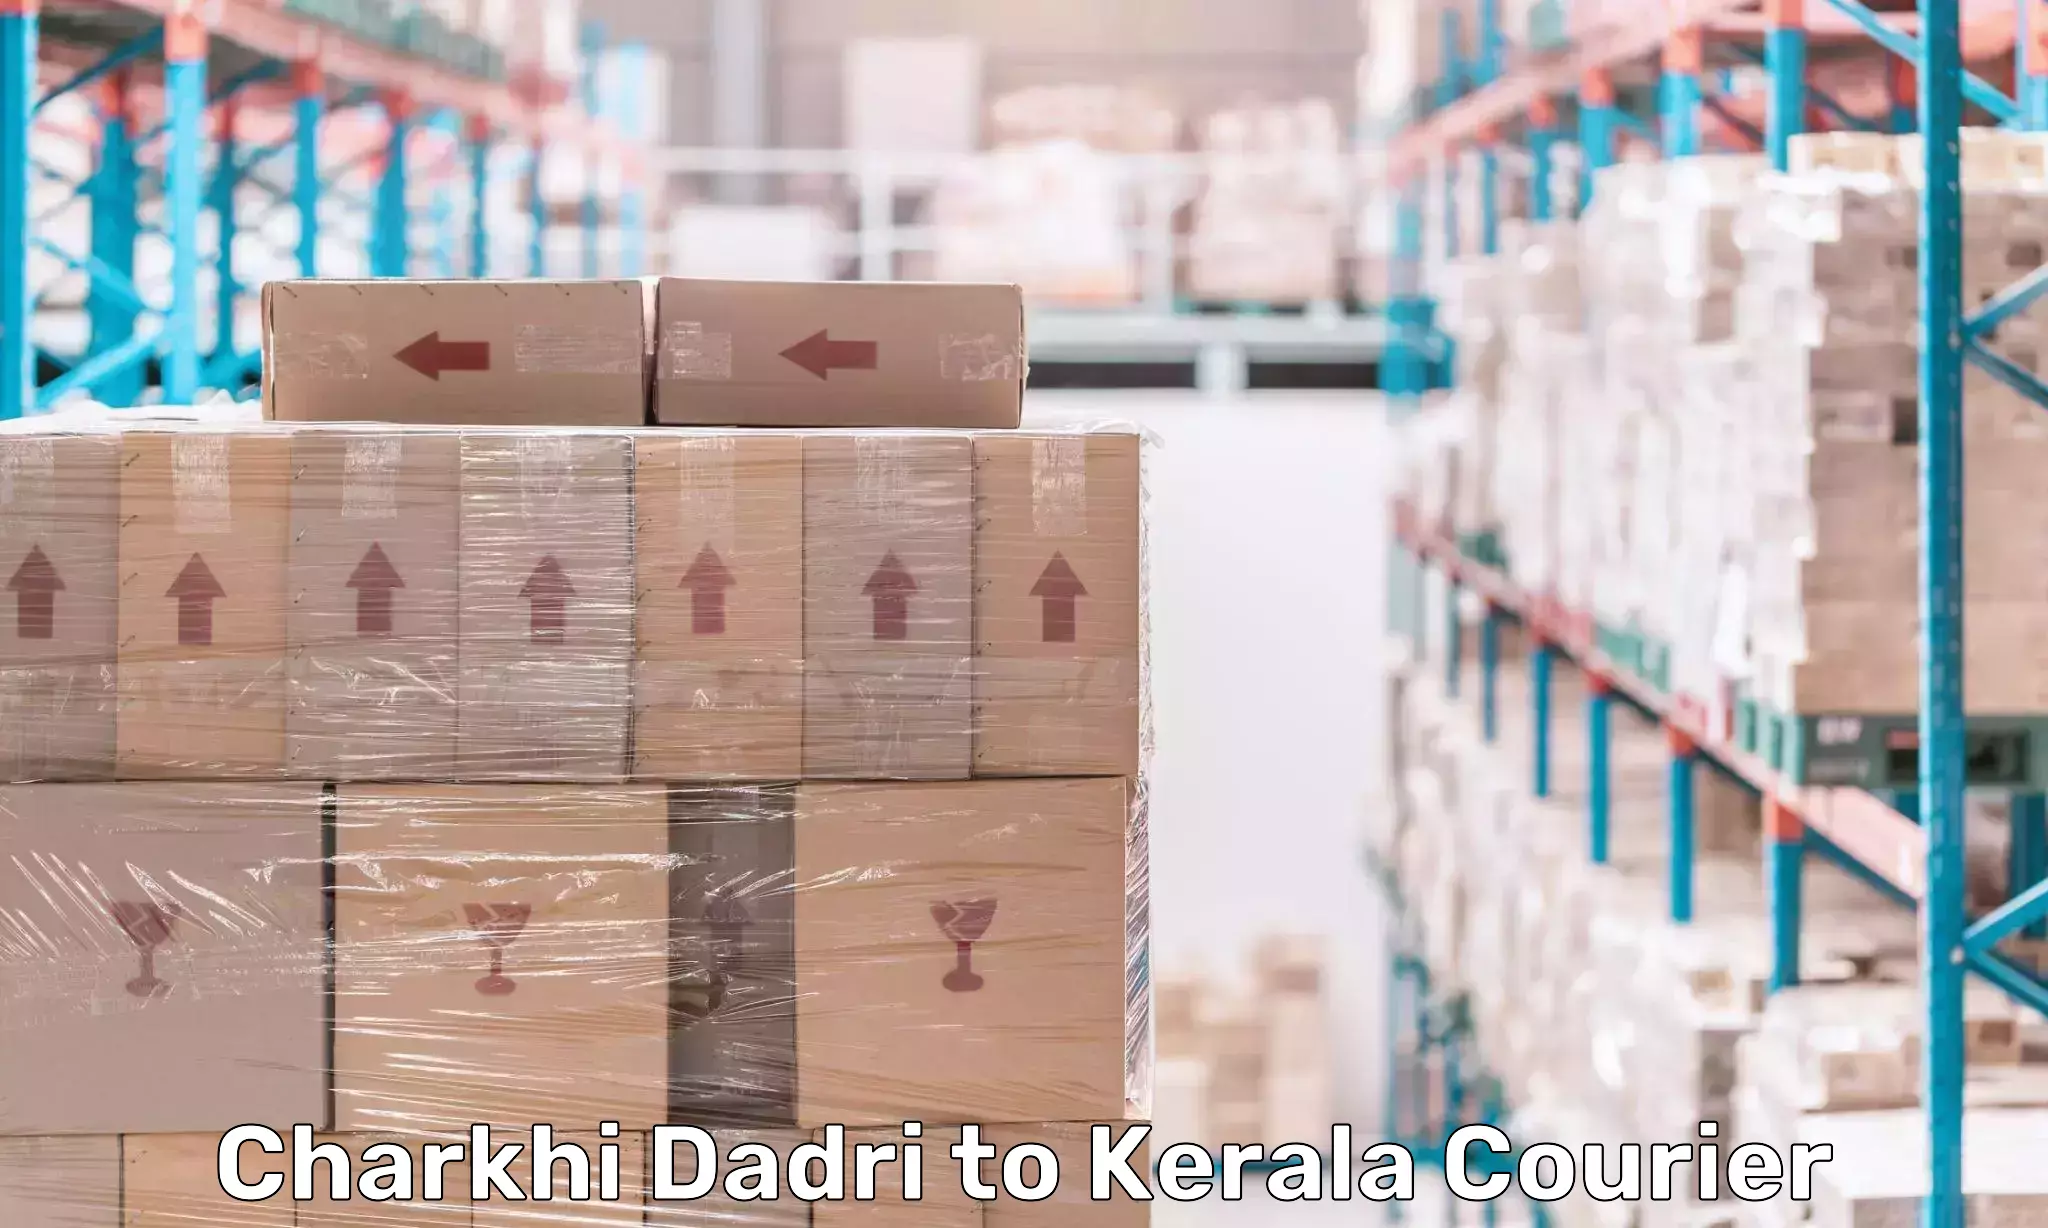 Courier service booking Charkhi Dadri to Aluva